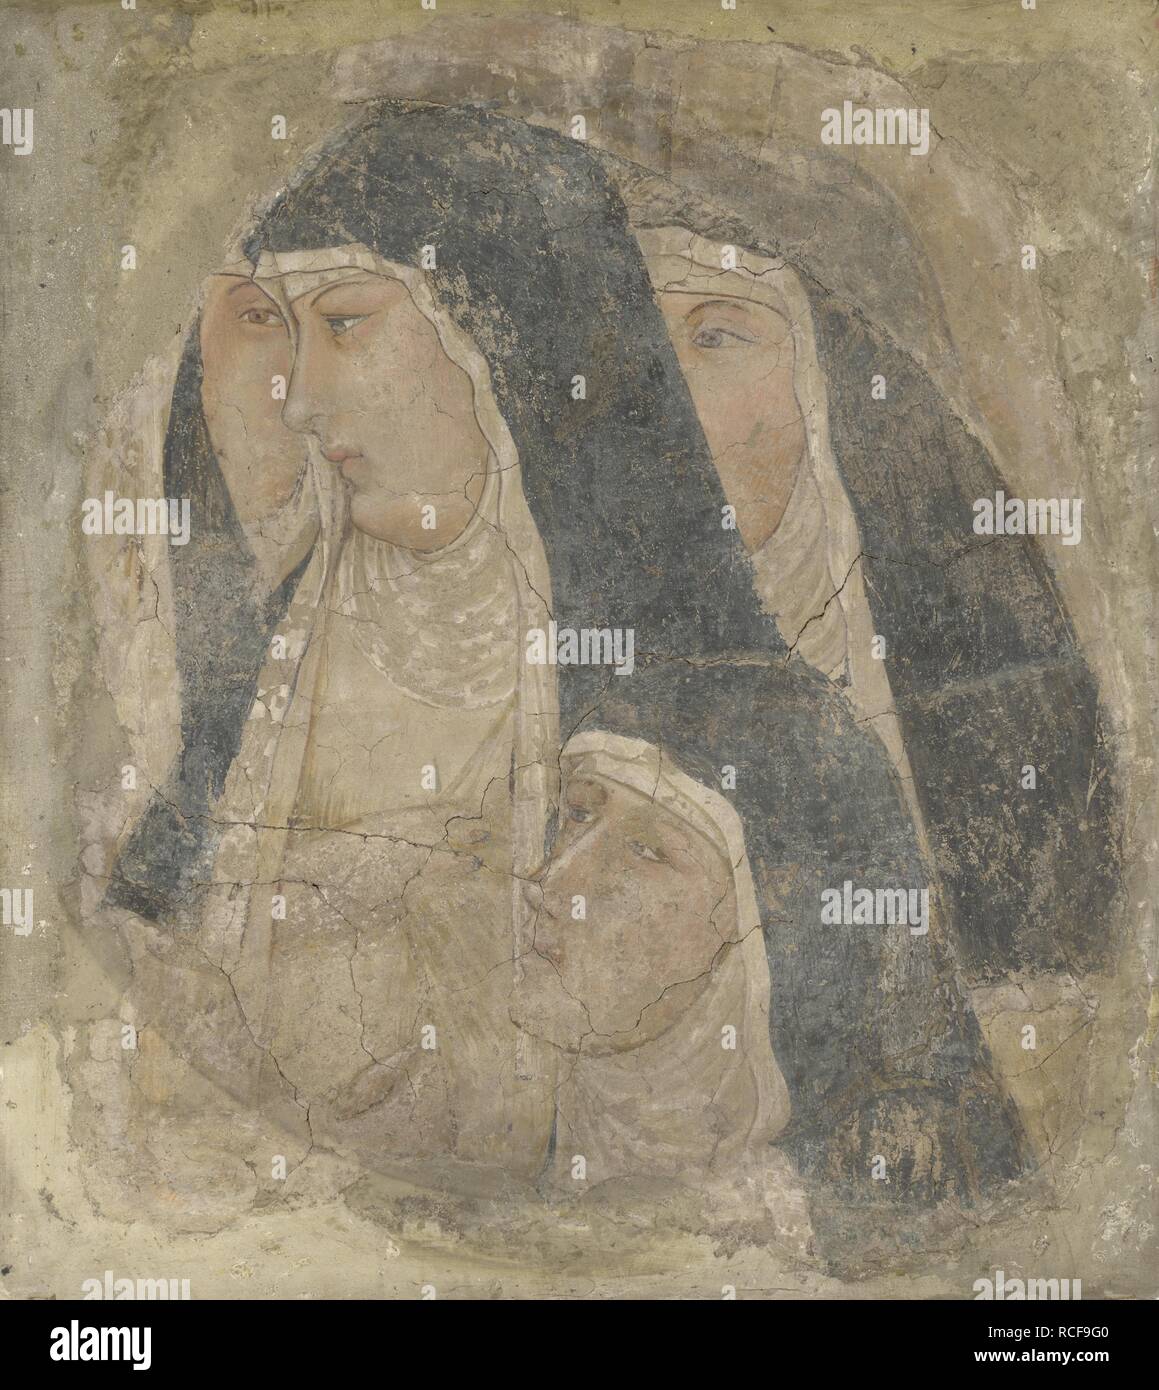 A Group of Four Poor Clares. Museum: National Gallery, London. Author: LORENZETTI, AMBROGIO. Stock Photo